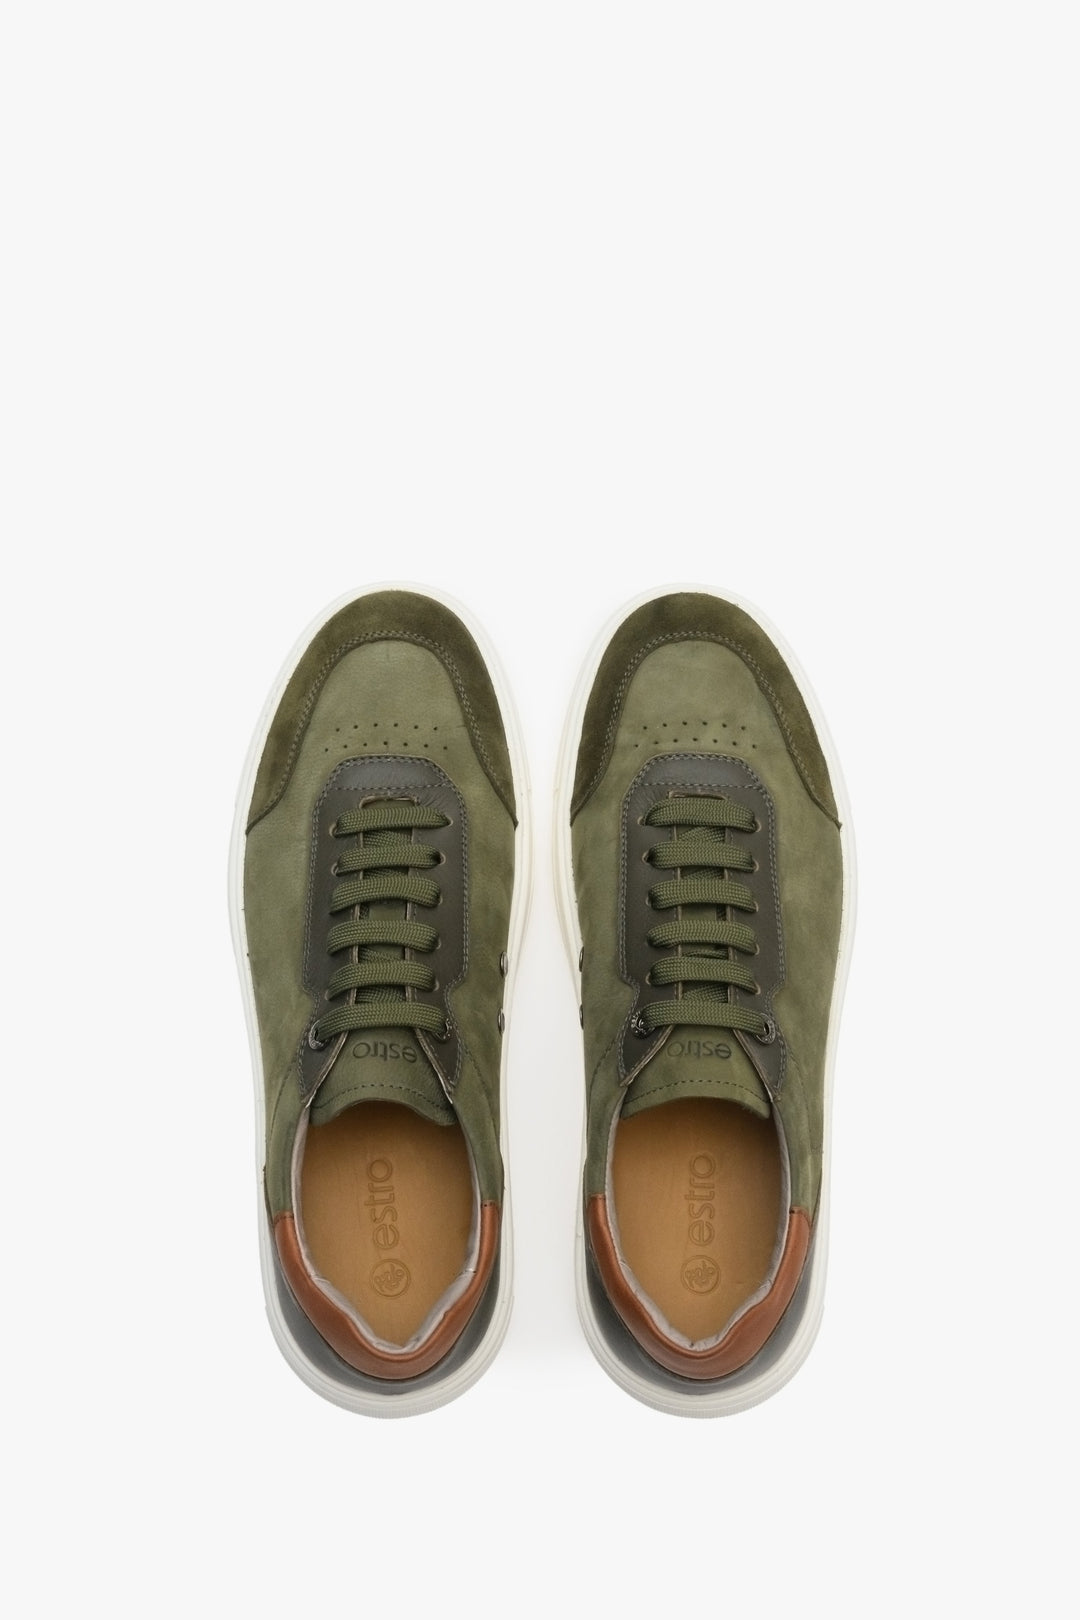 Green-brown and white Estro men's nubuck and natural leather sneakers - shoe presentation from above.